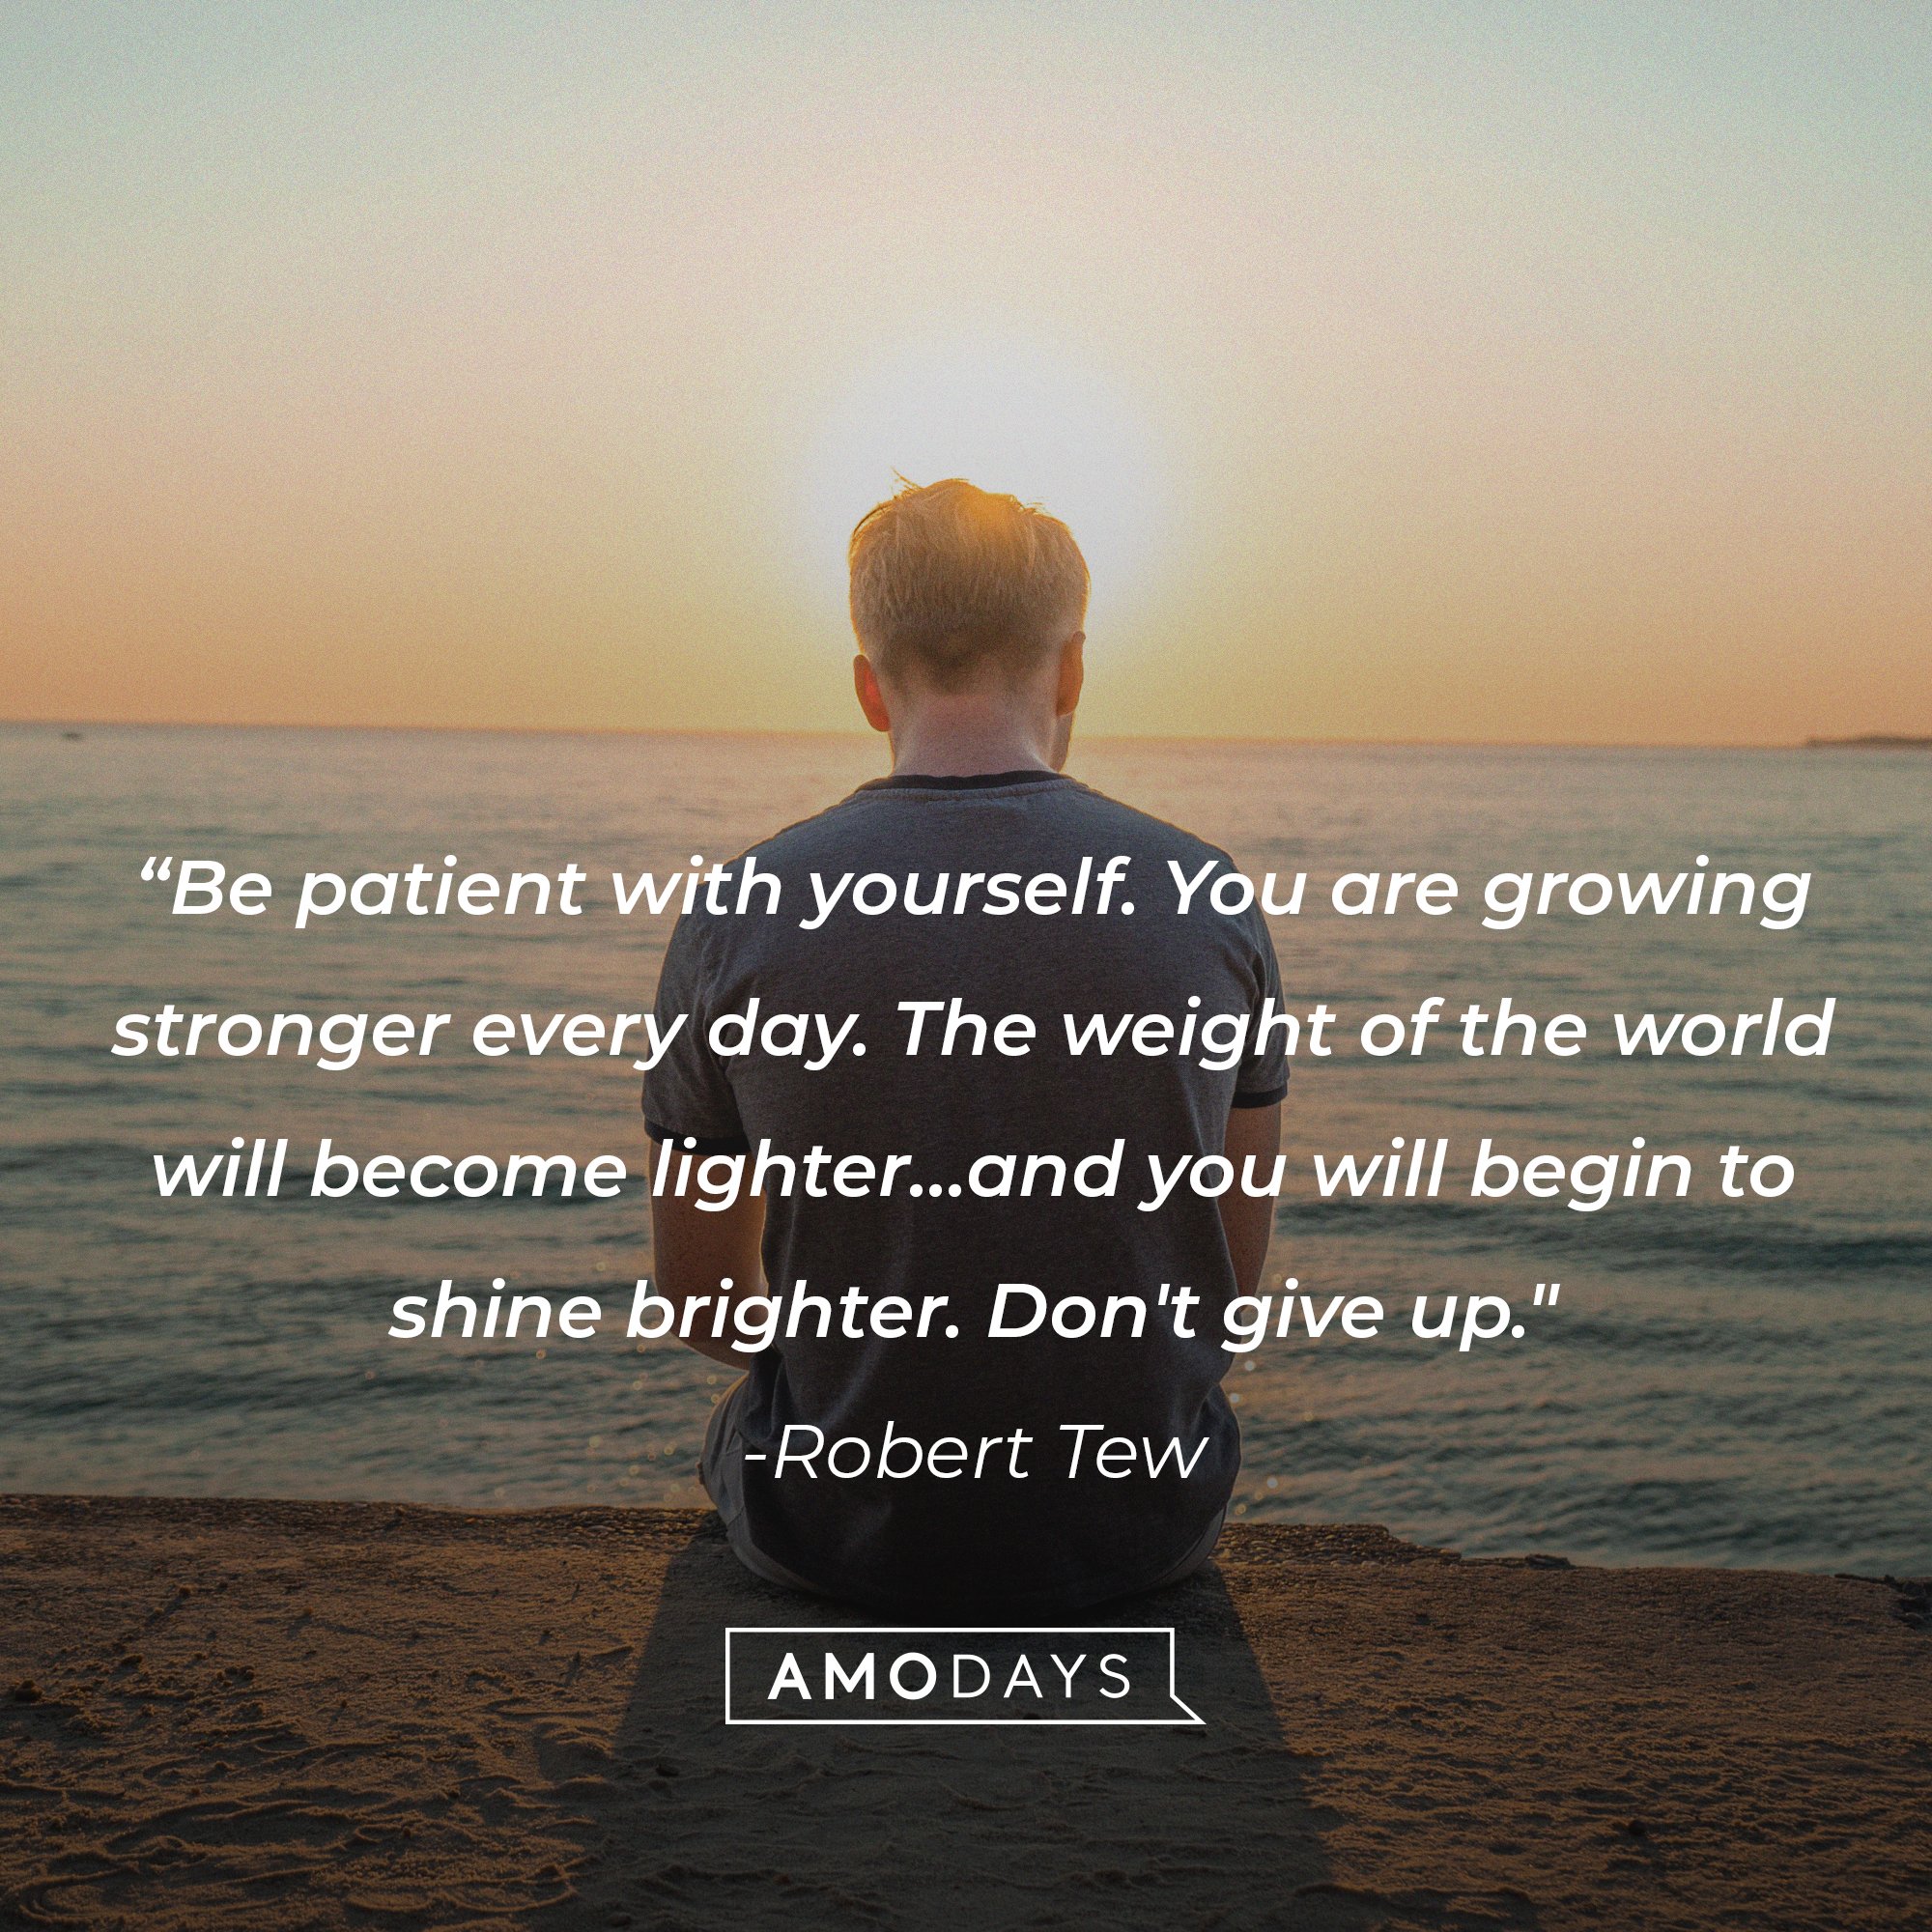 Robert Tew’s quote: “Be patient with yourself. You are growing stronger every day. The weight of the world will become lighter…and you will begin to shine brighter. Don't give up." | Image: AmoDays 